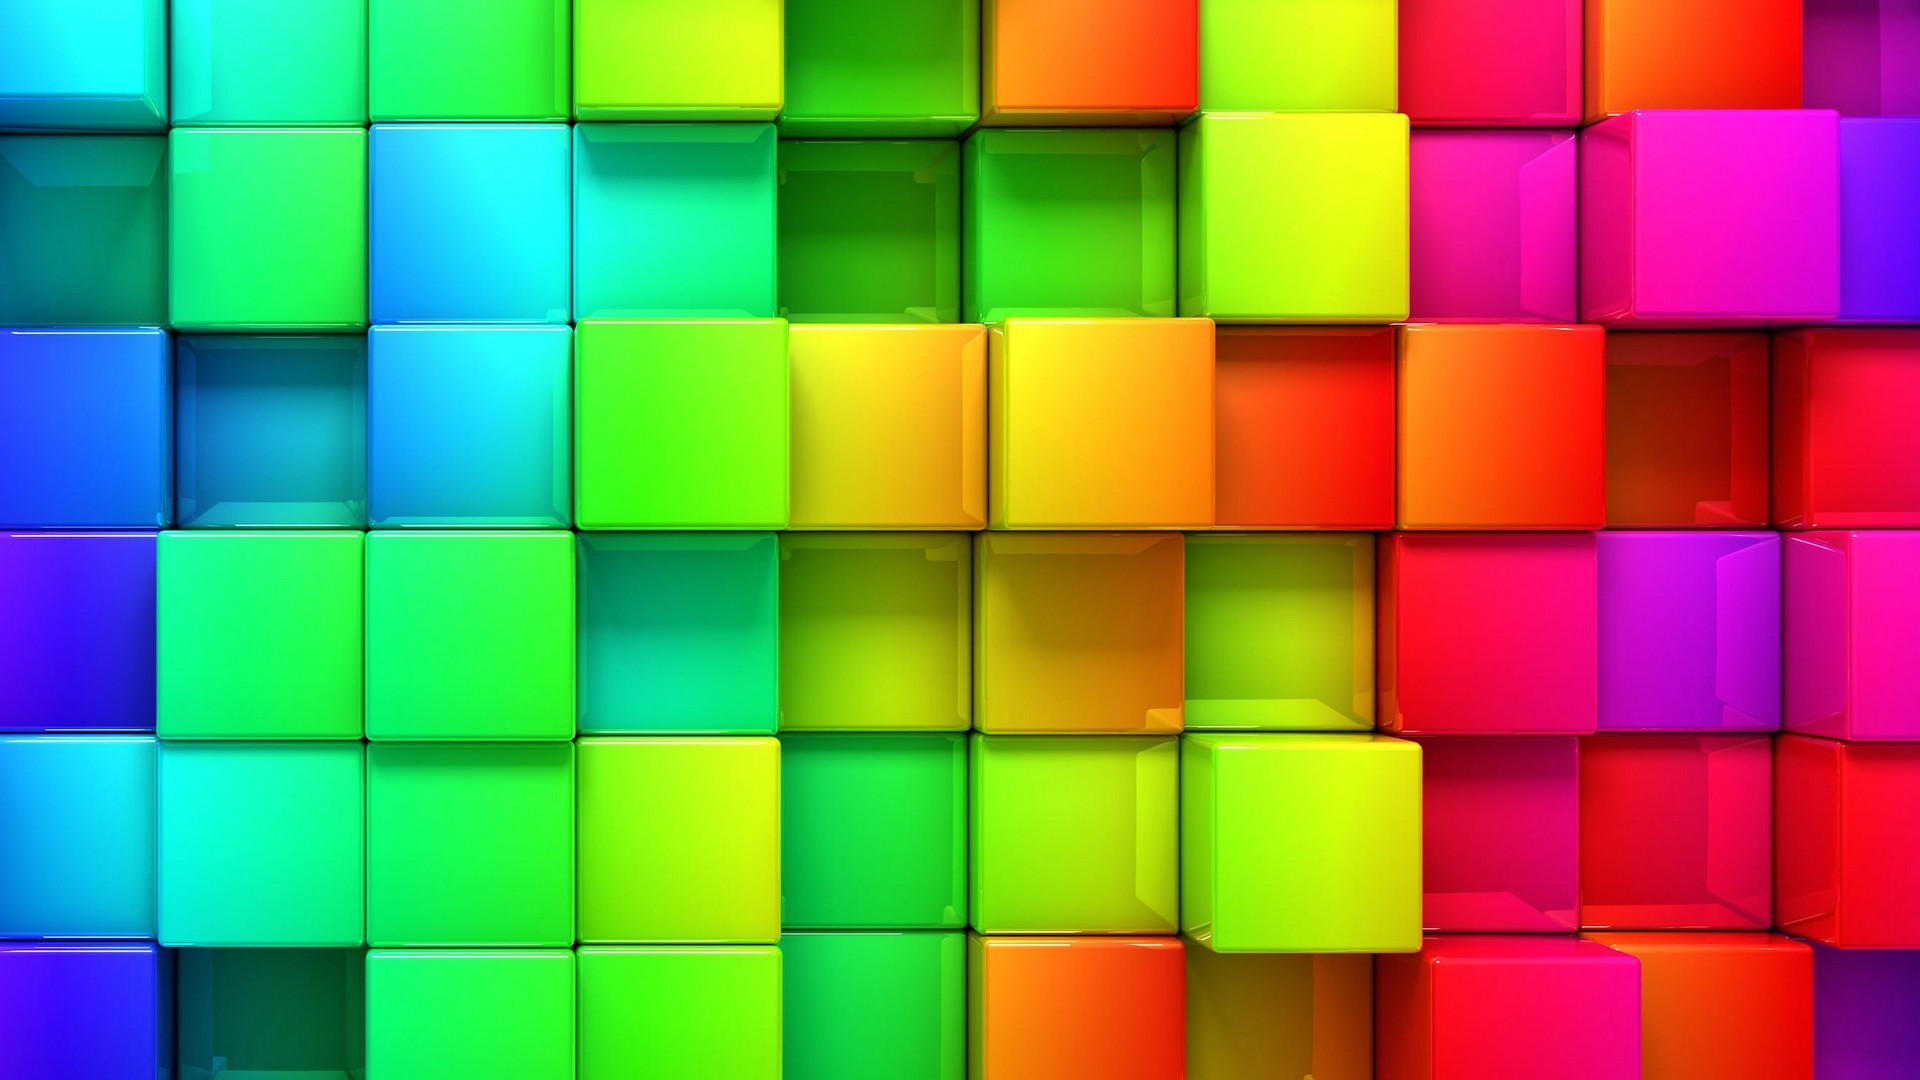 Wallpaper Rainbow Colors HD With Resolution 1920X1080 pixel. You can make this wallpaper for your Desktop Computer Backgrounds, Mac Wallpapers, Android Lock screen or iPhone Screensavers